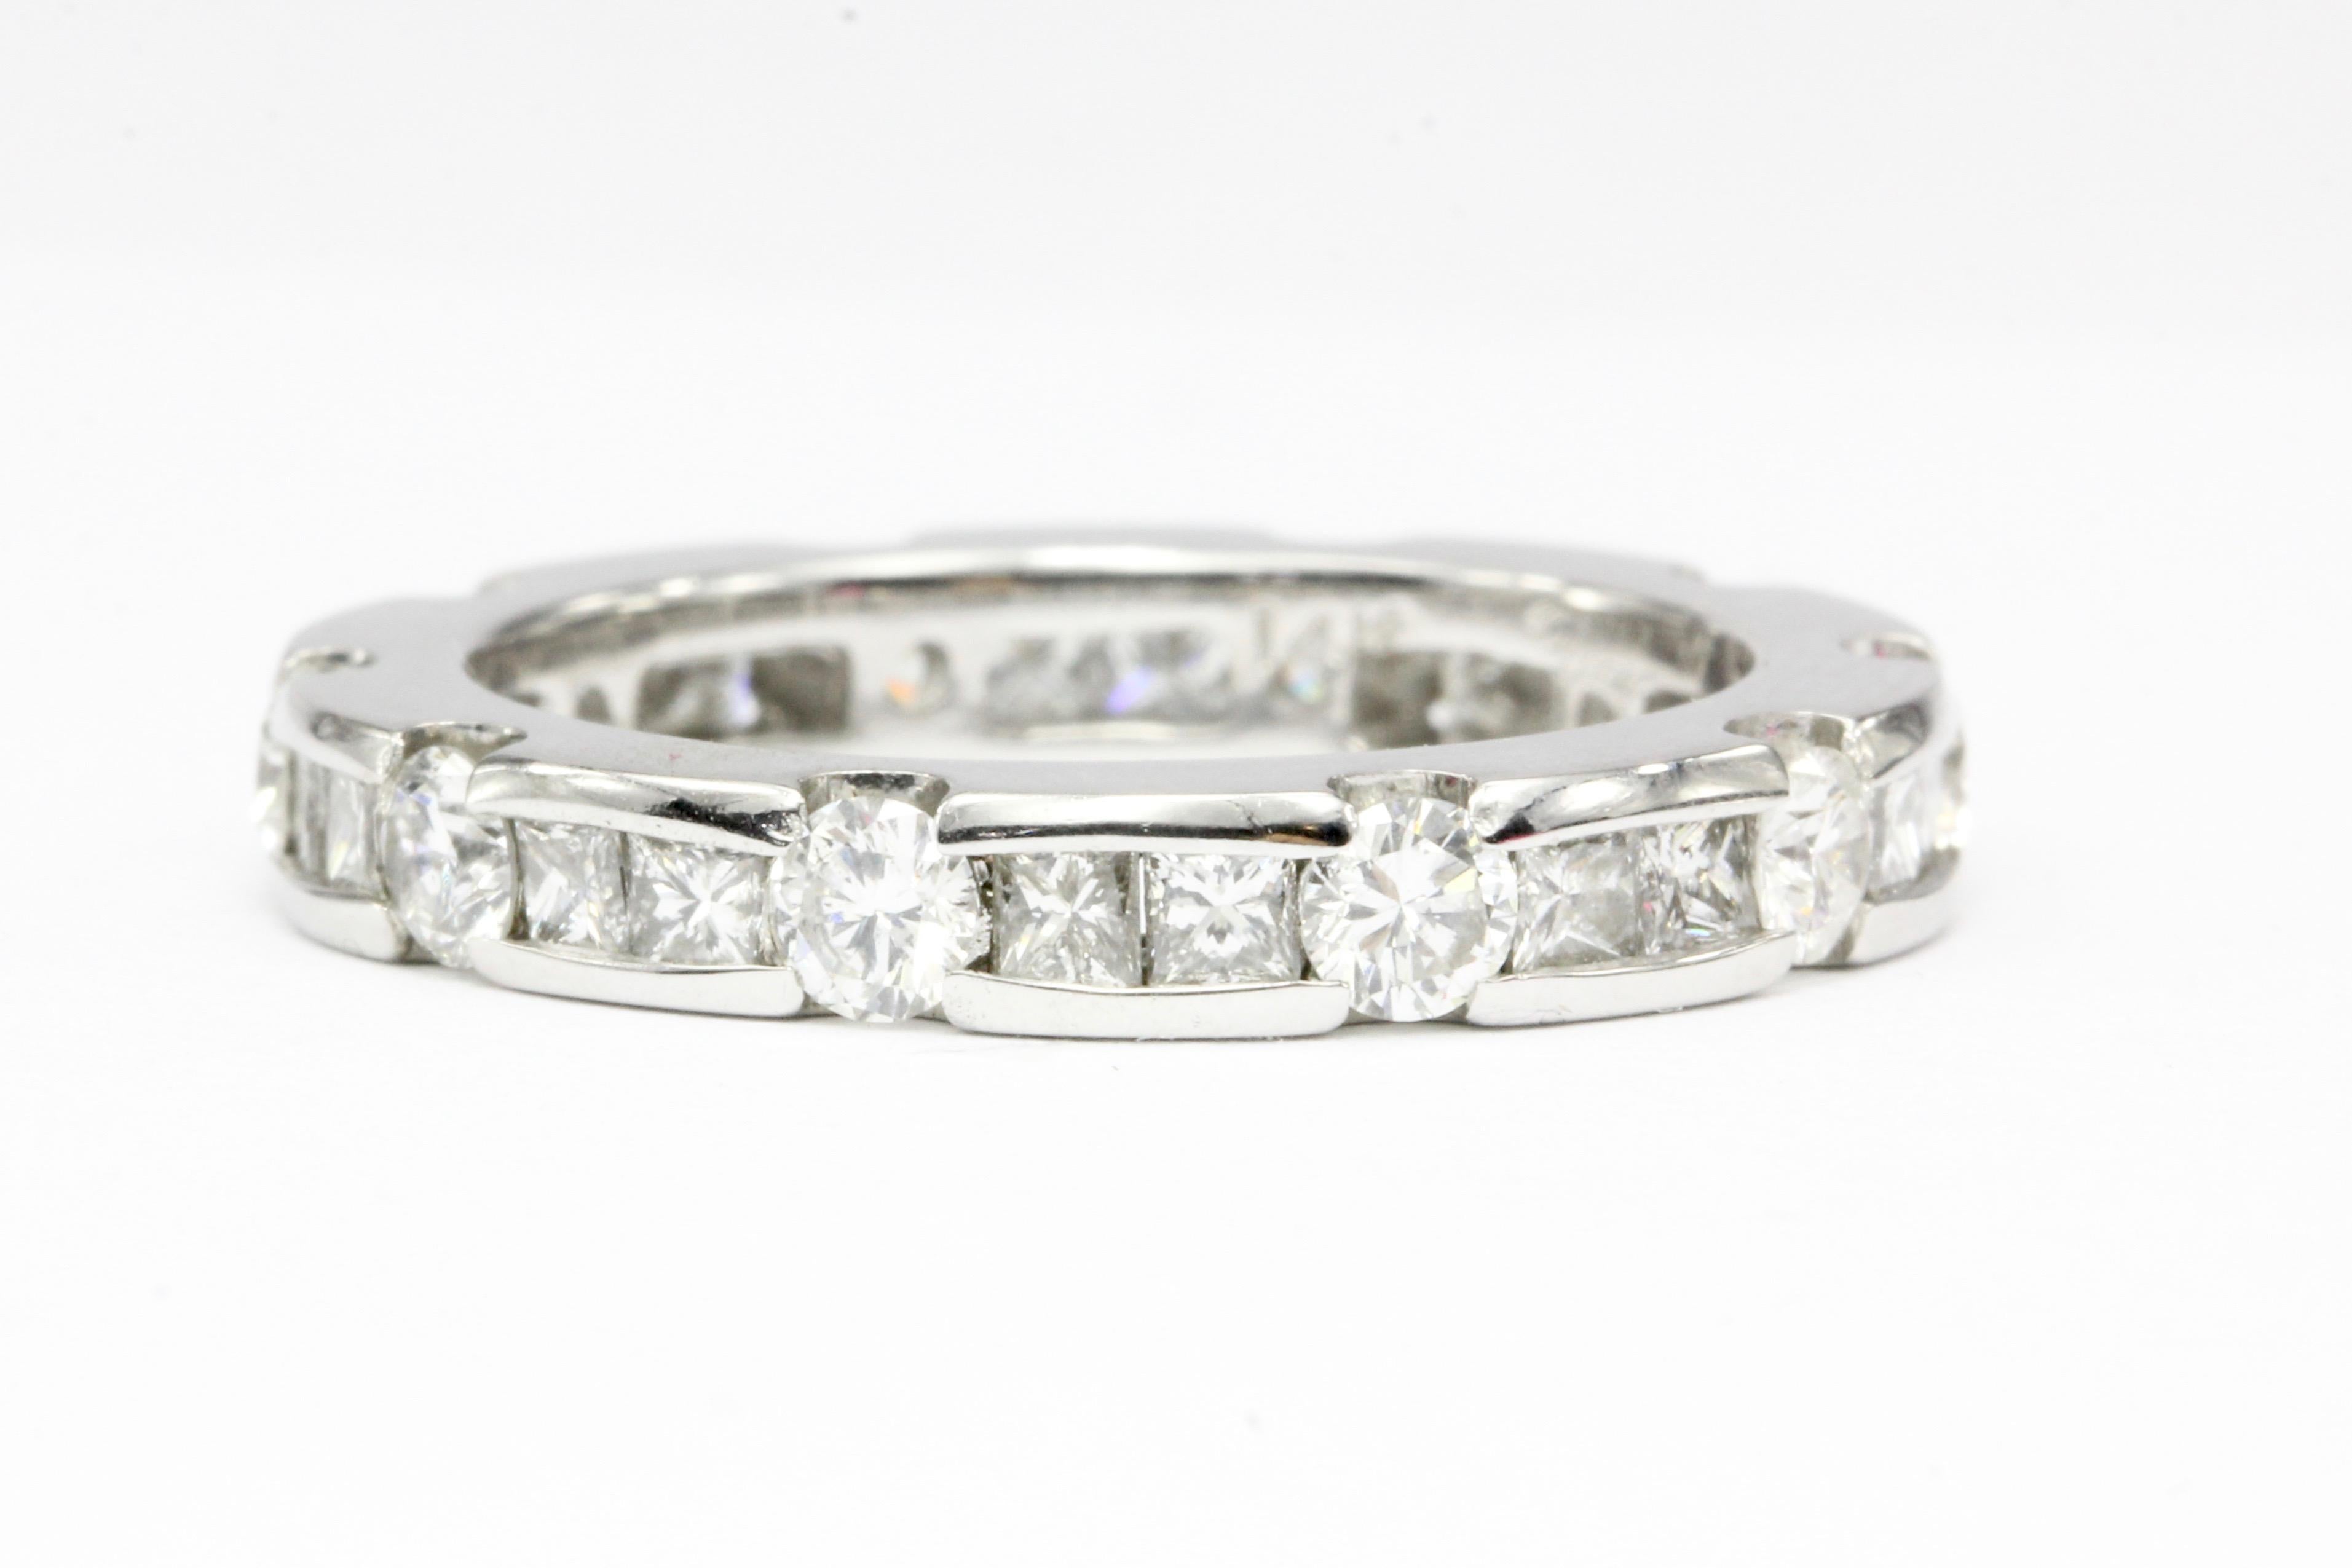 Era: Modern

Hallmarks: 14K, Dana

Composition: 14K White Gold

Primary Stone: Diamonds

Shape: Round and Princess Cuts

Color/Clarity: G/H - SI1/2

Total Diamond Weight: Approximately 2 carats

Ring Width: 3.85mm 

Rise Above Finger: 3.18mm

Ring